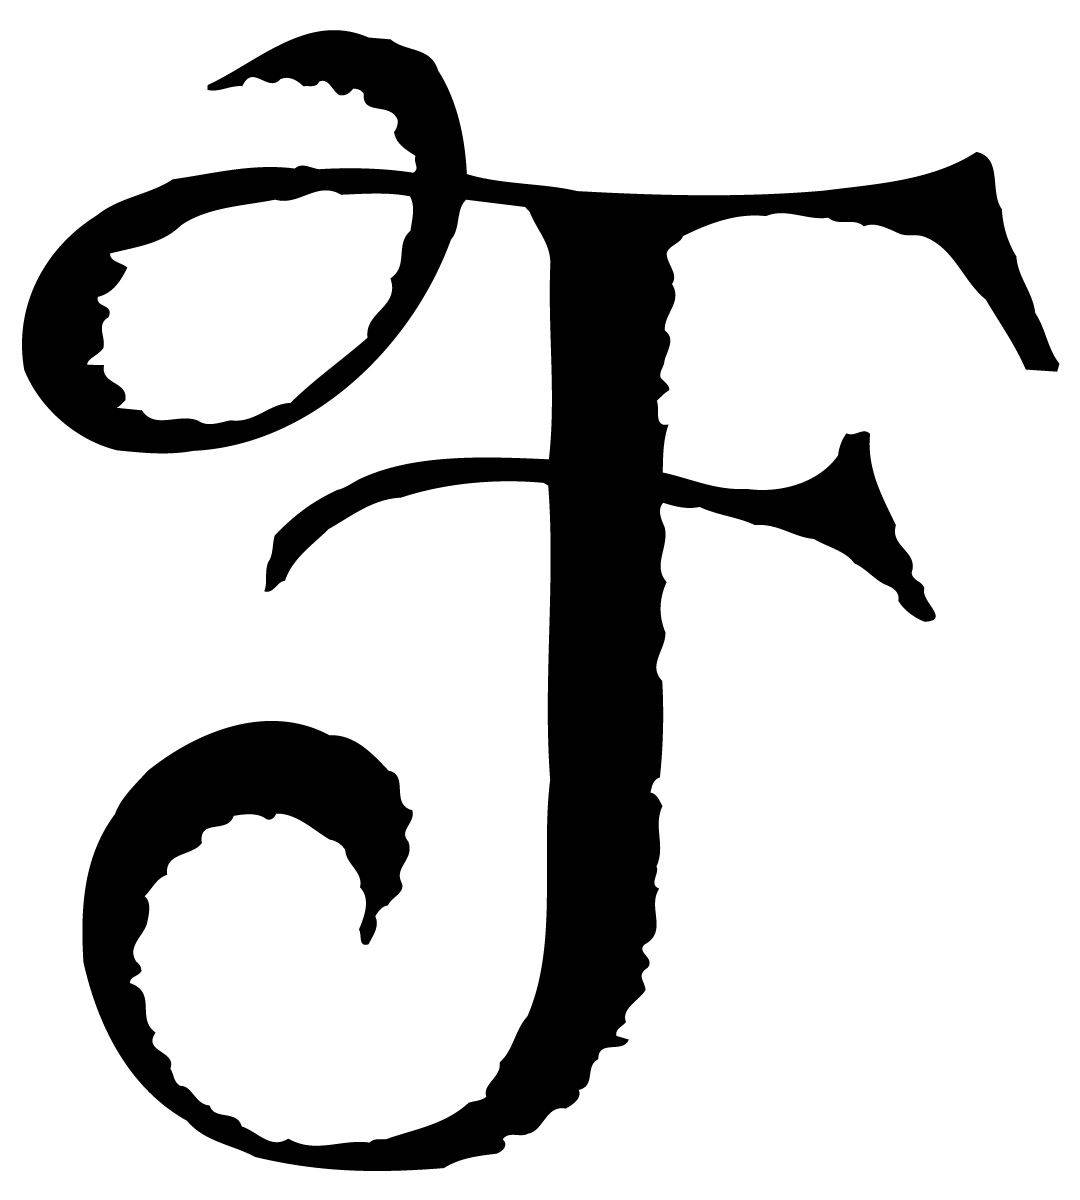 Fancy Calligraphy Letter F Background